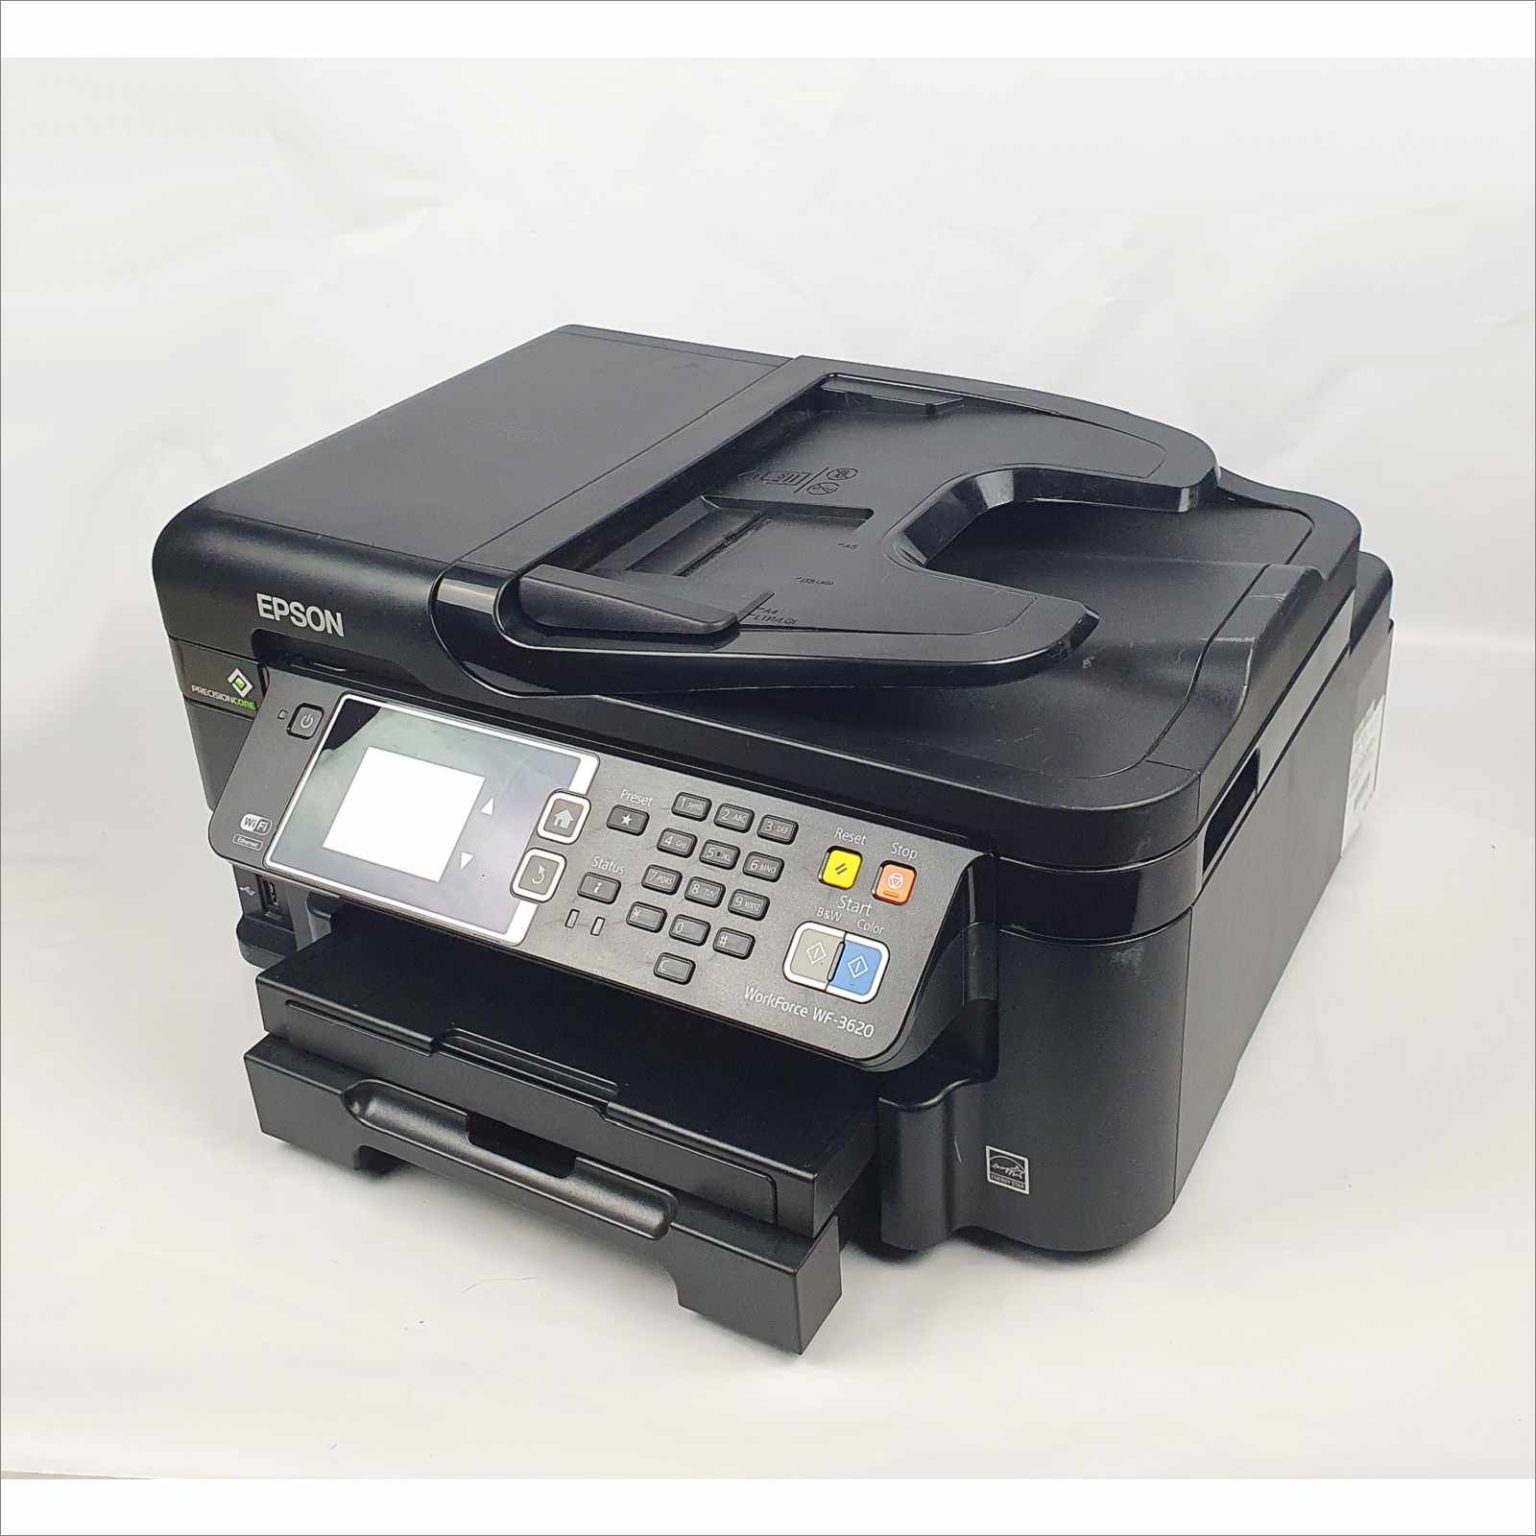 Epson Workforce Wf 3620 All In One Printer Fast Scanner C481d Computer Network Telecom 9958